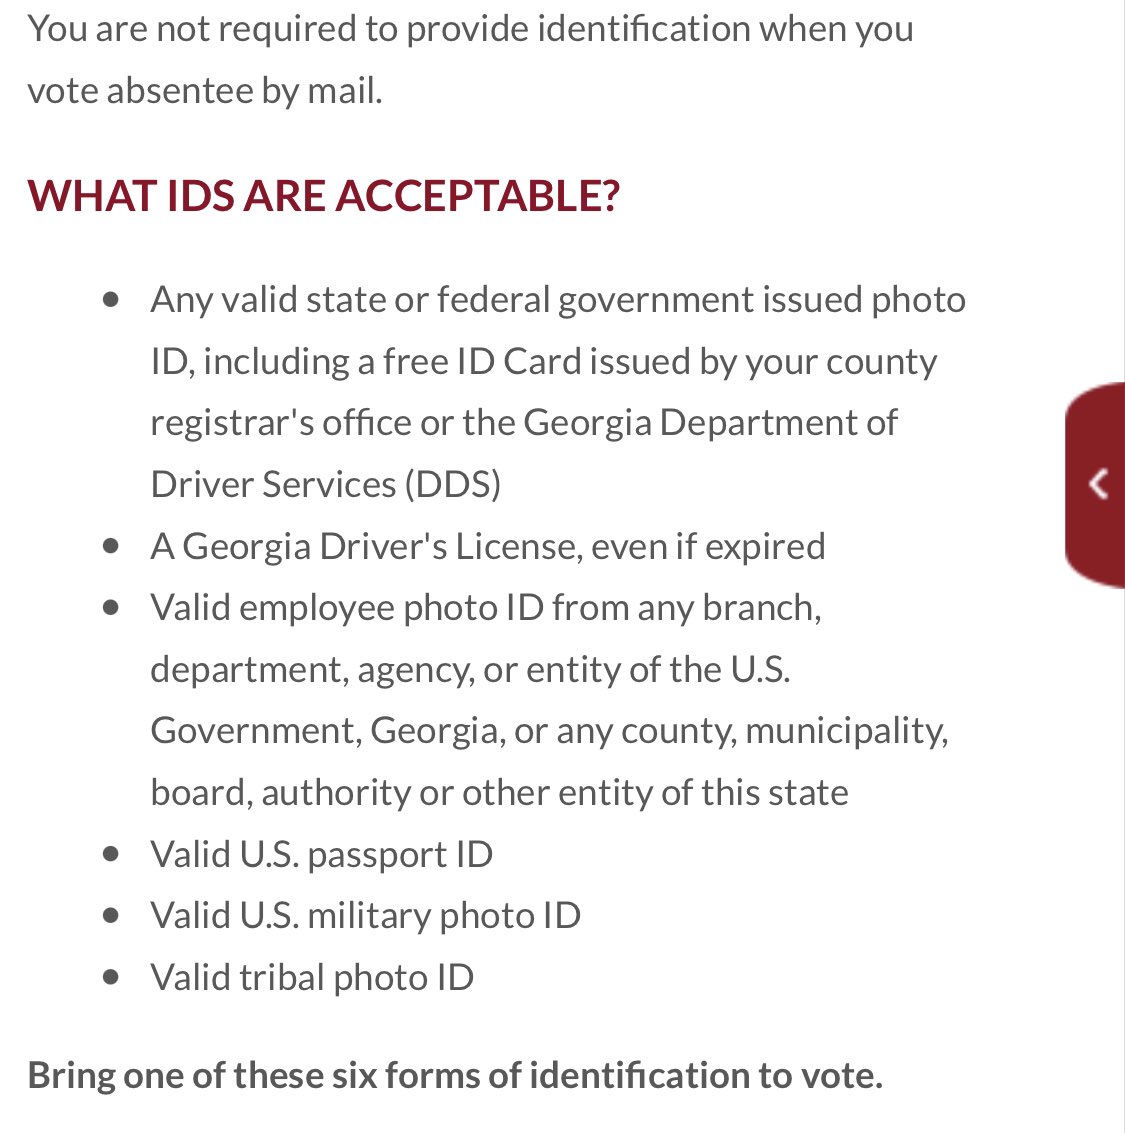  #GEORGIAHere’s all you need to know about your ID to vote. 1. Acceptable Forms2. How to Get a GA Voter ID Card3. Acceptable Georgia State College IDs (USG & Technical Colleges)